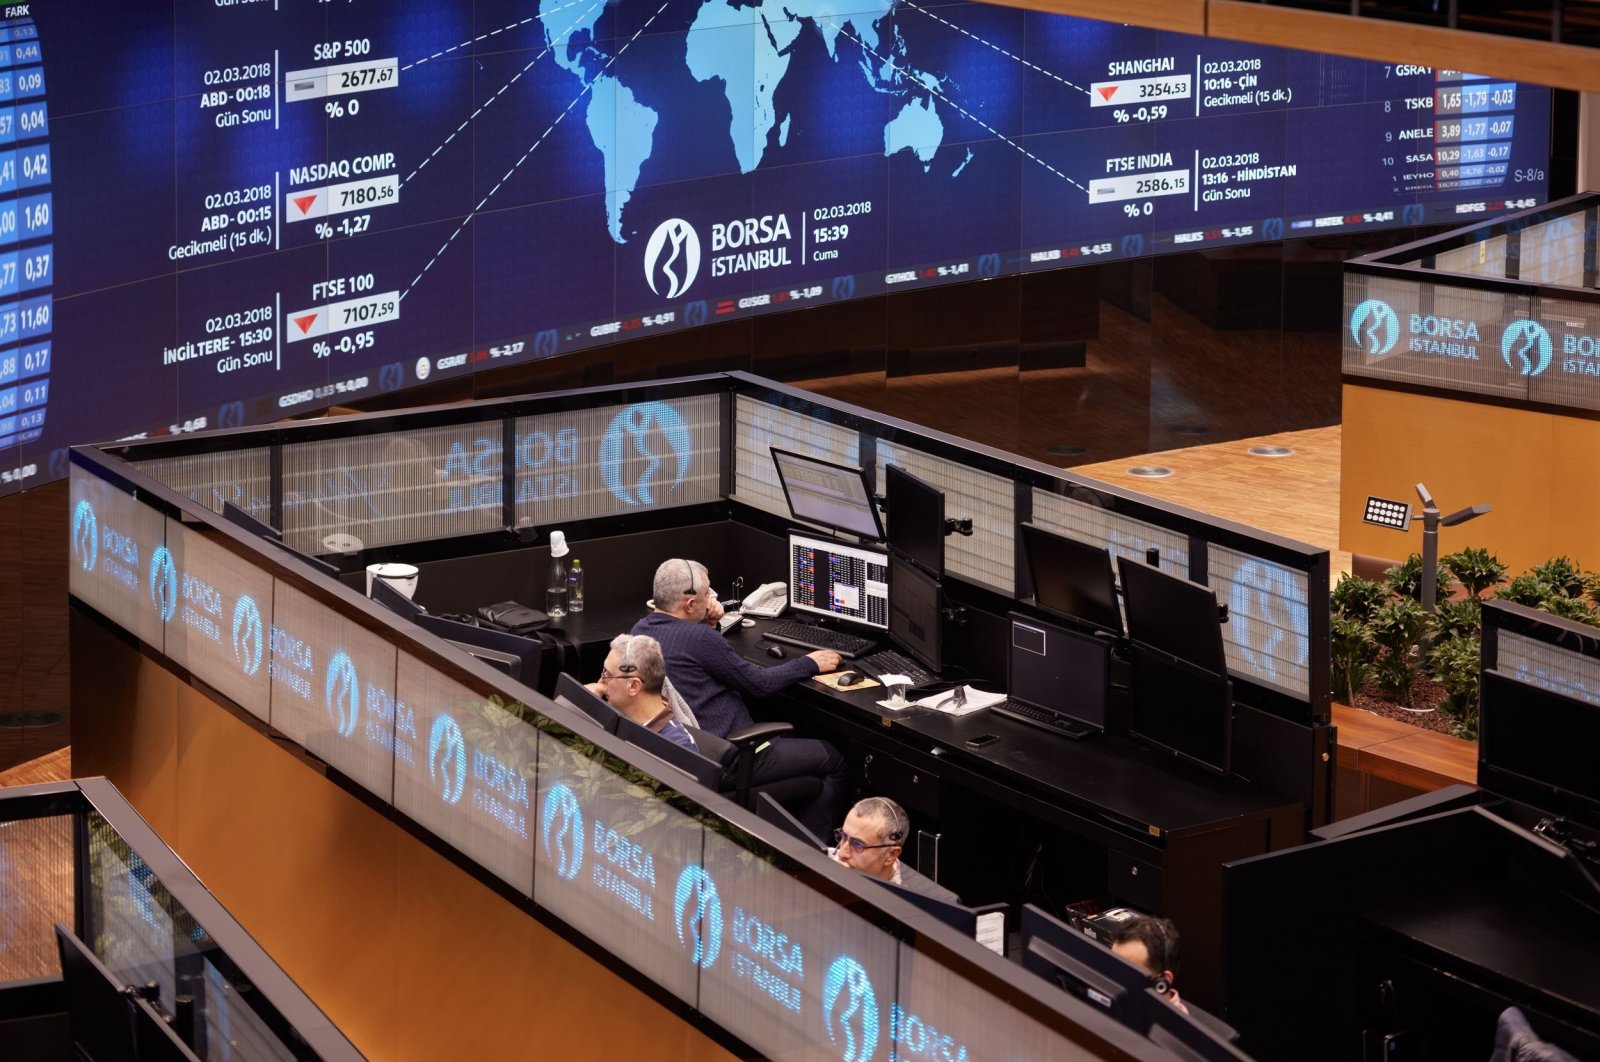 Stockbrokers trading at Borsa Istanbul (BIST) as exchange closes 2022 at an all-time high, in Istanbul, Türkiye, Friday, Dec 30, 2022. (IHA Photo)